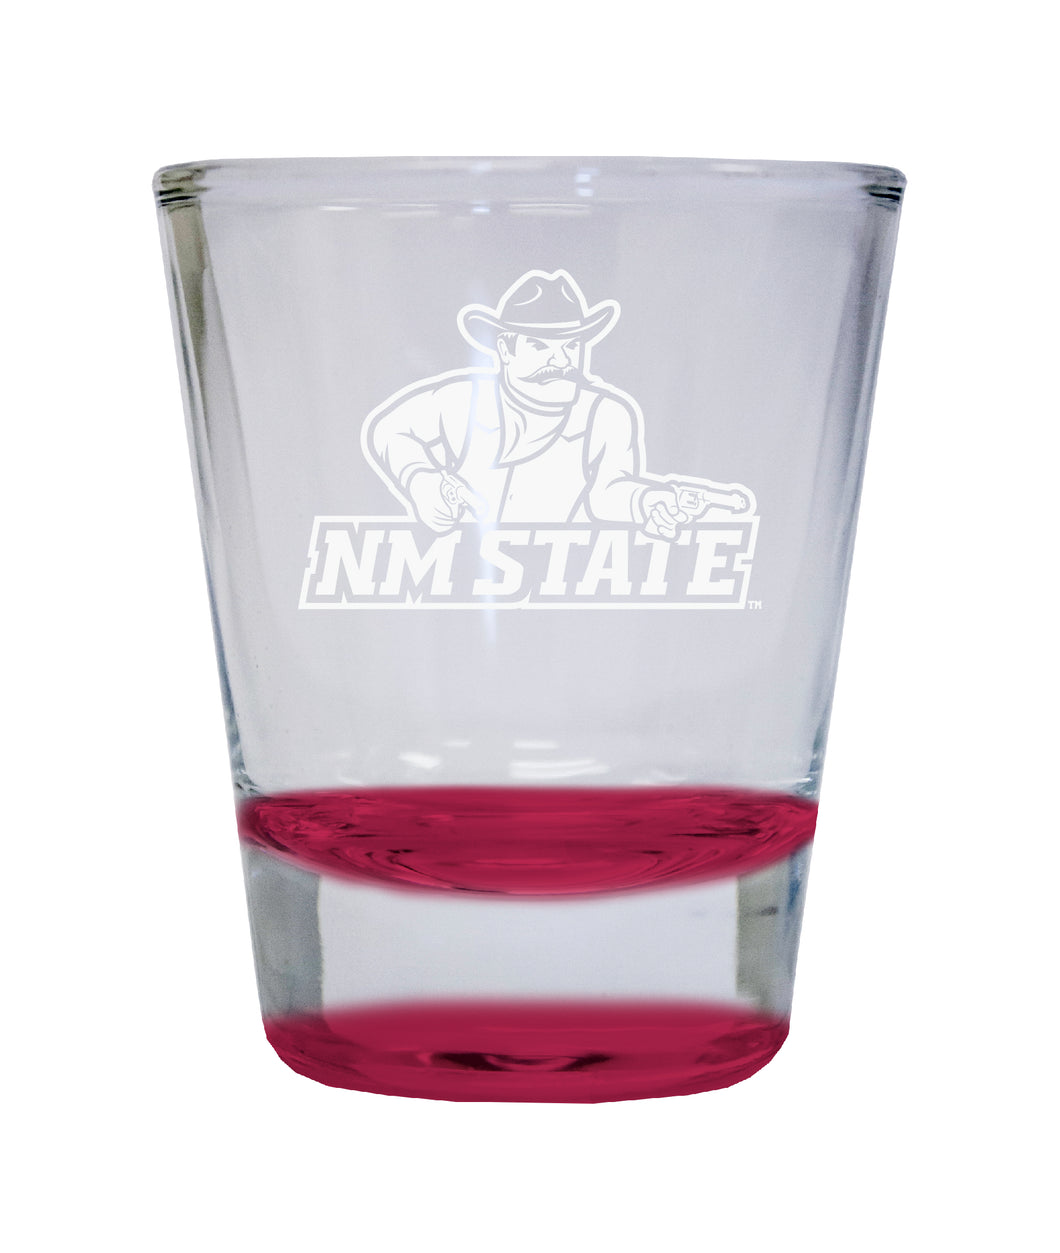 New Mexico State University Pistol Pete Etched Round Shot Glass 2 oz Red